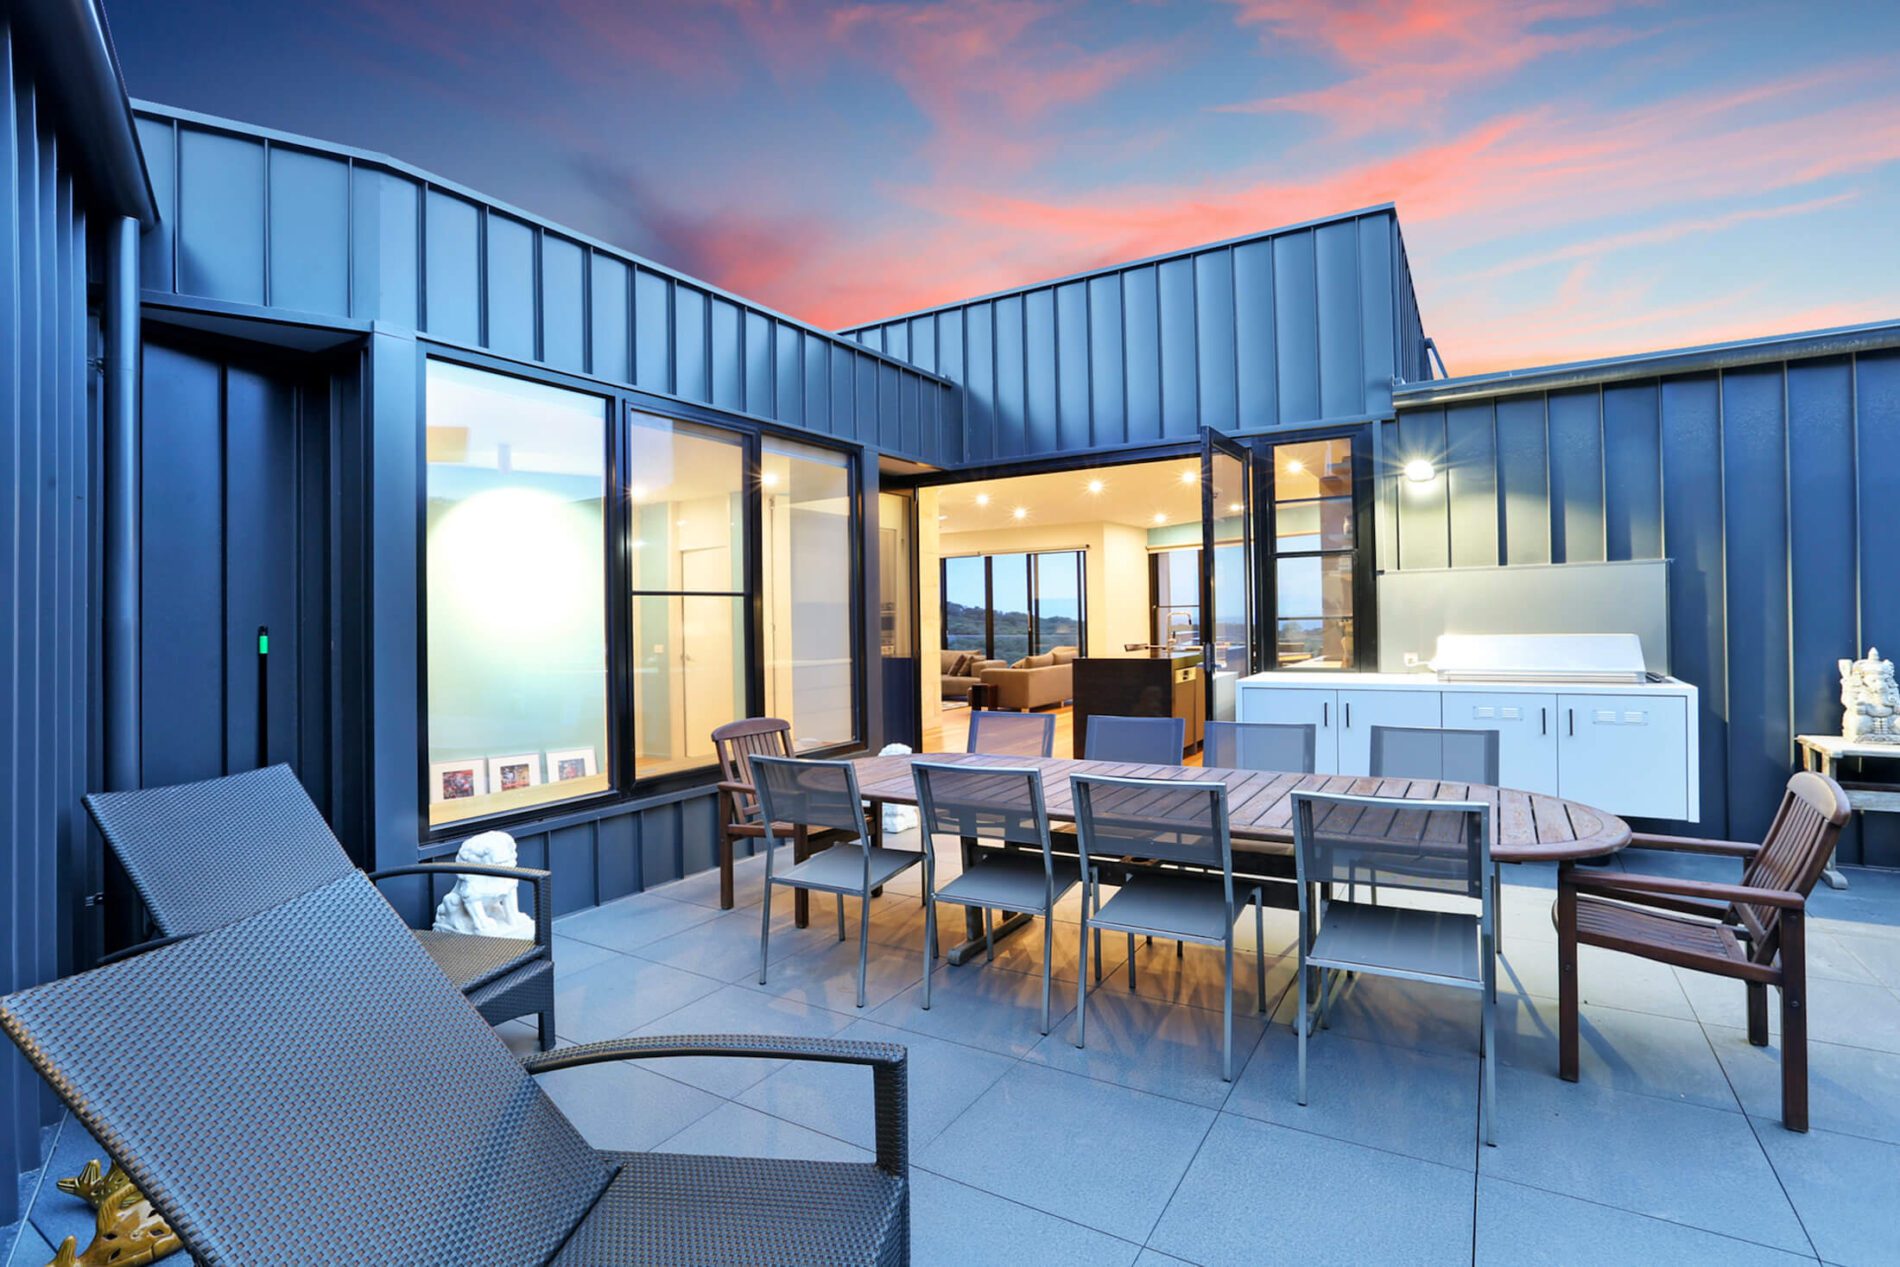 Patio at sunset with standing seam metal building cladding, timber dining table and chairs, open doors to kitchen and living